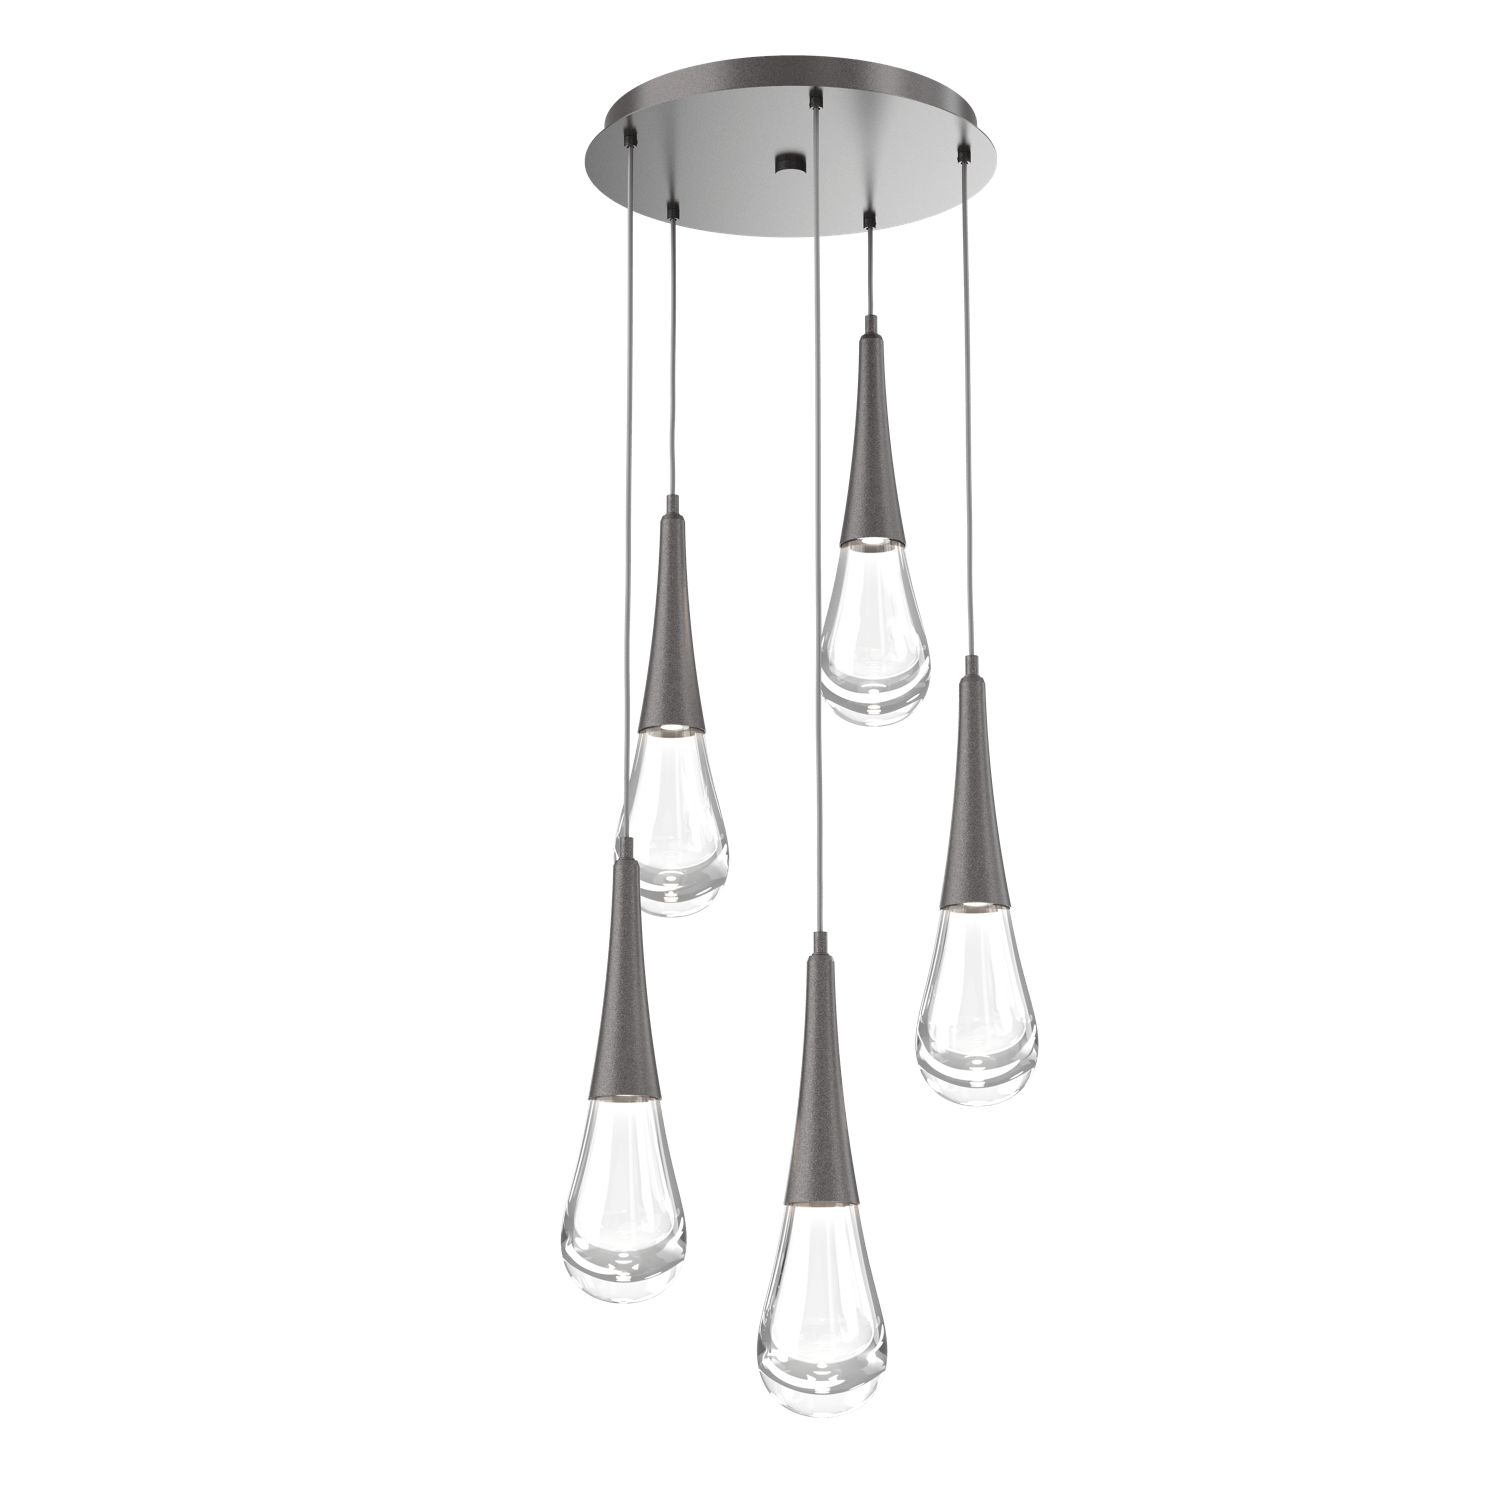 CHB0078-05-GP-Hammerton-Studio-Raindrop-5-light-round-pendant-chandelier-with-graphite-finish-and-clear-blown-glass-shades-and-LED-lamping